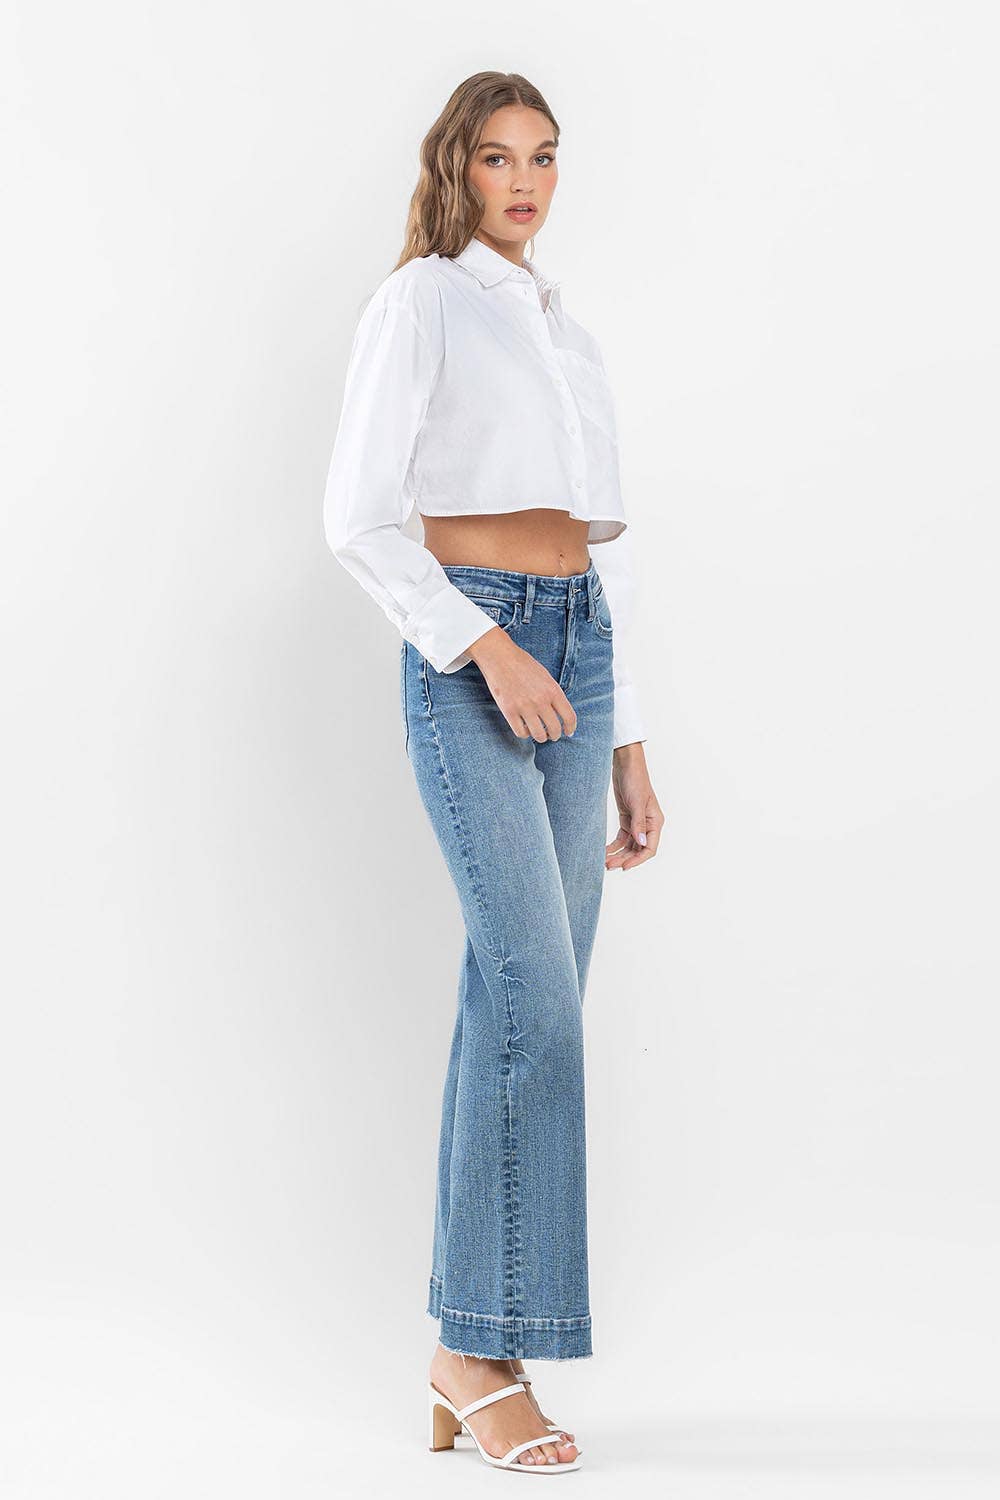 FLYING MONKEY - HIGH RISE WIDE LEG JEANS WITH TROUSER HEM DETAIL F5391: PERMISSIBLE / 25